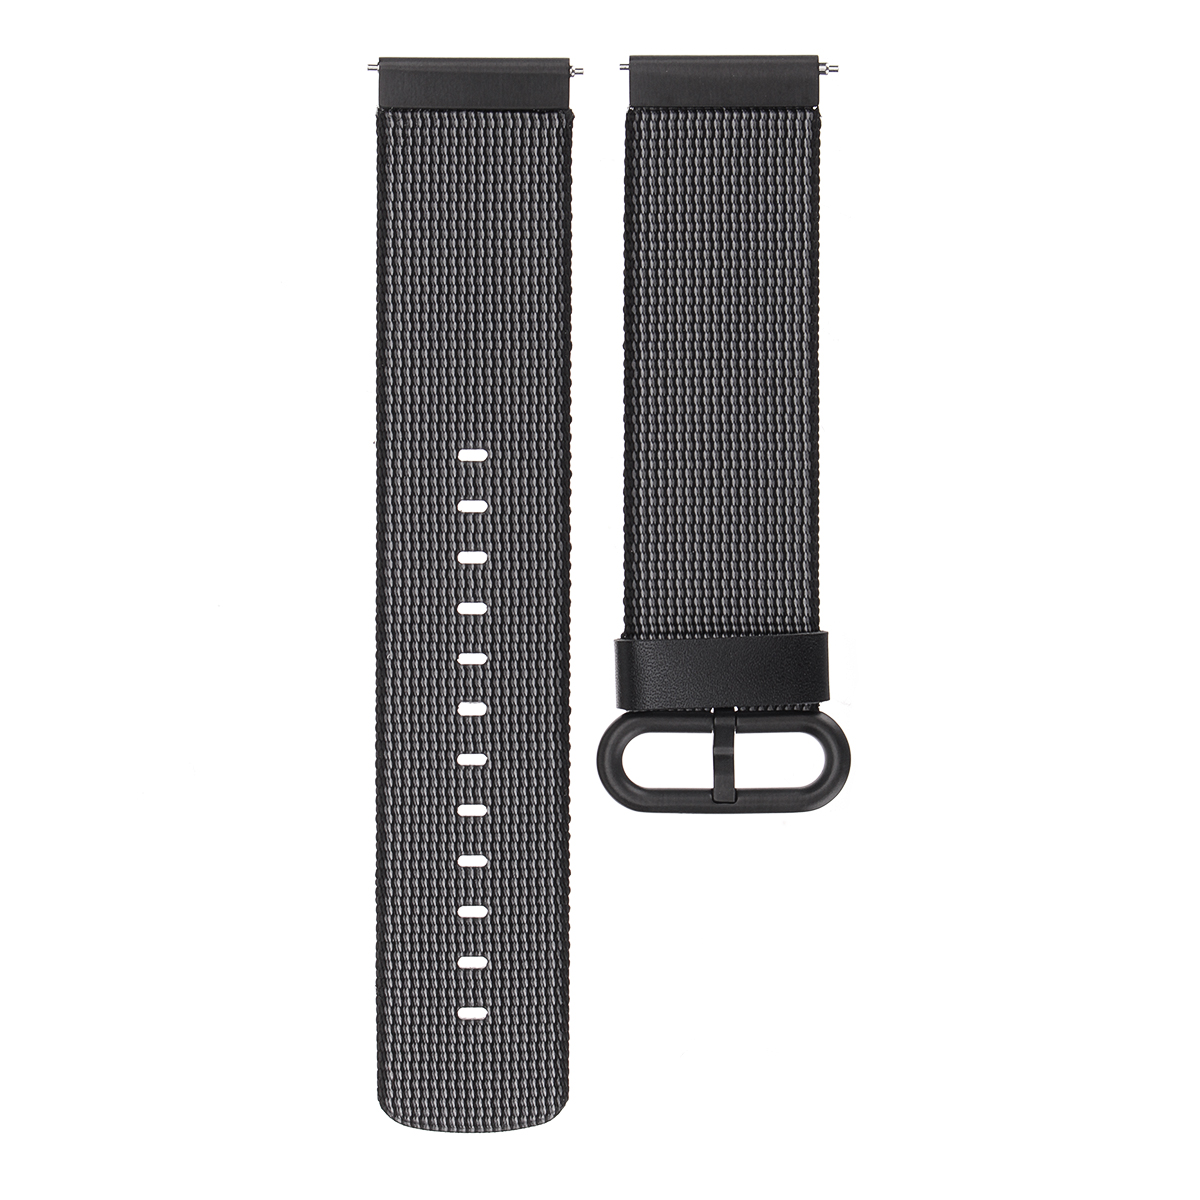 Replacement-Watch-Band-Strap-Wristband-Nylon-Loop-for-Fitbit-Versa-Sport-Watch-1308057-11